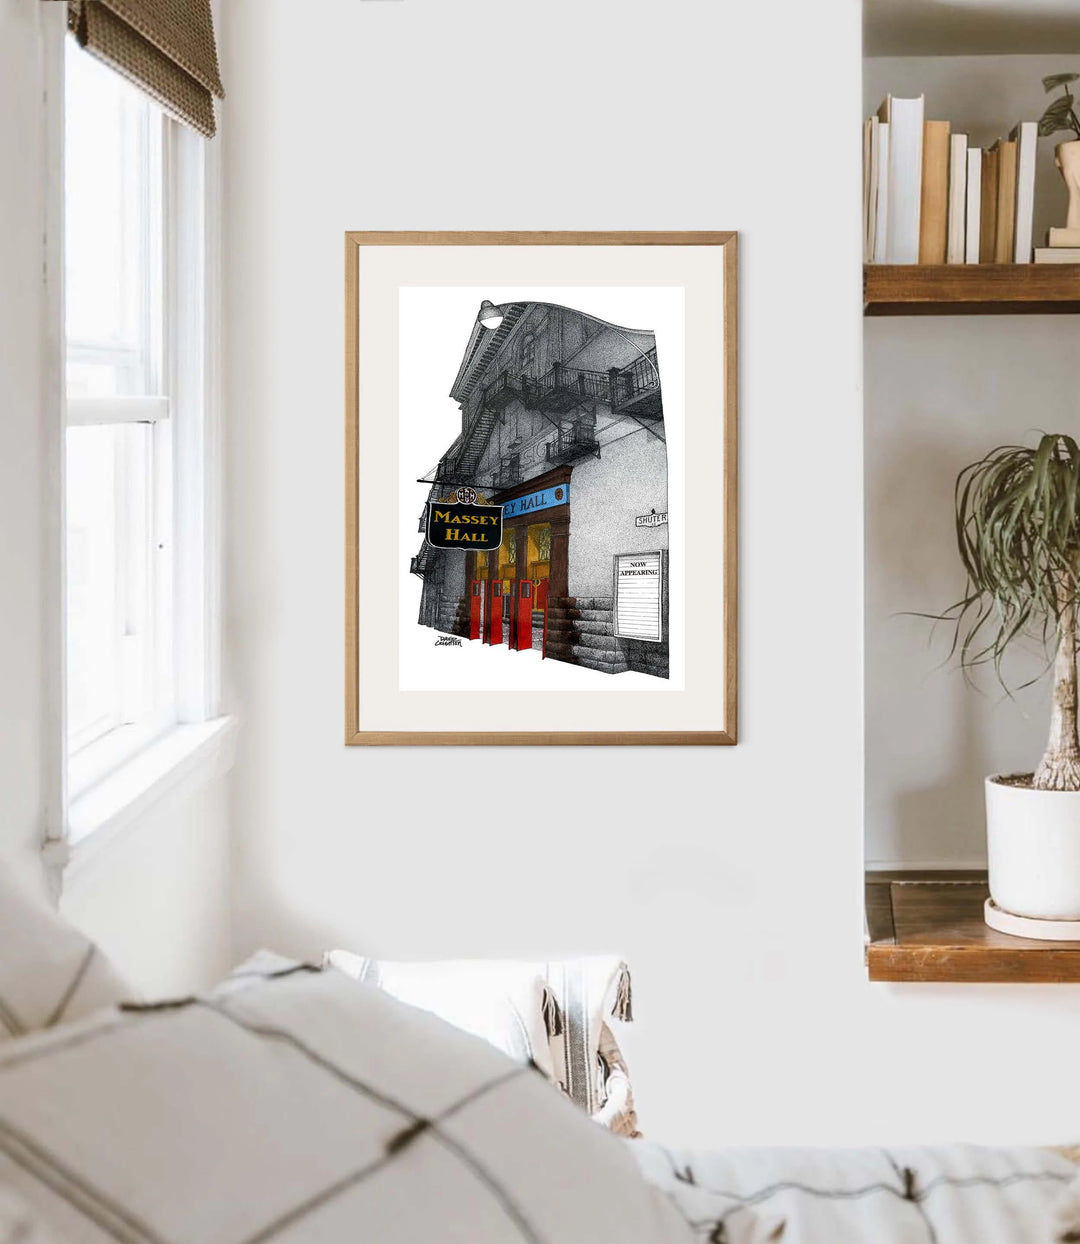 Massey Hall Glass Framed Art Print in Bedroom with Window